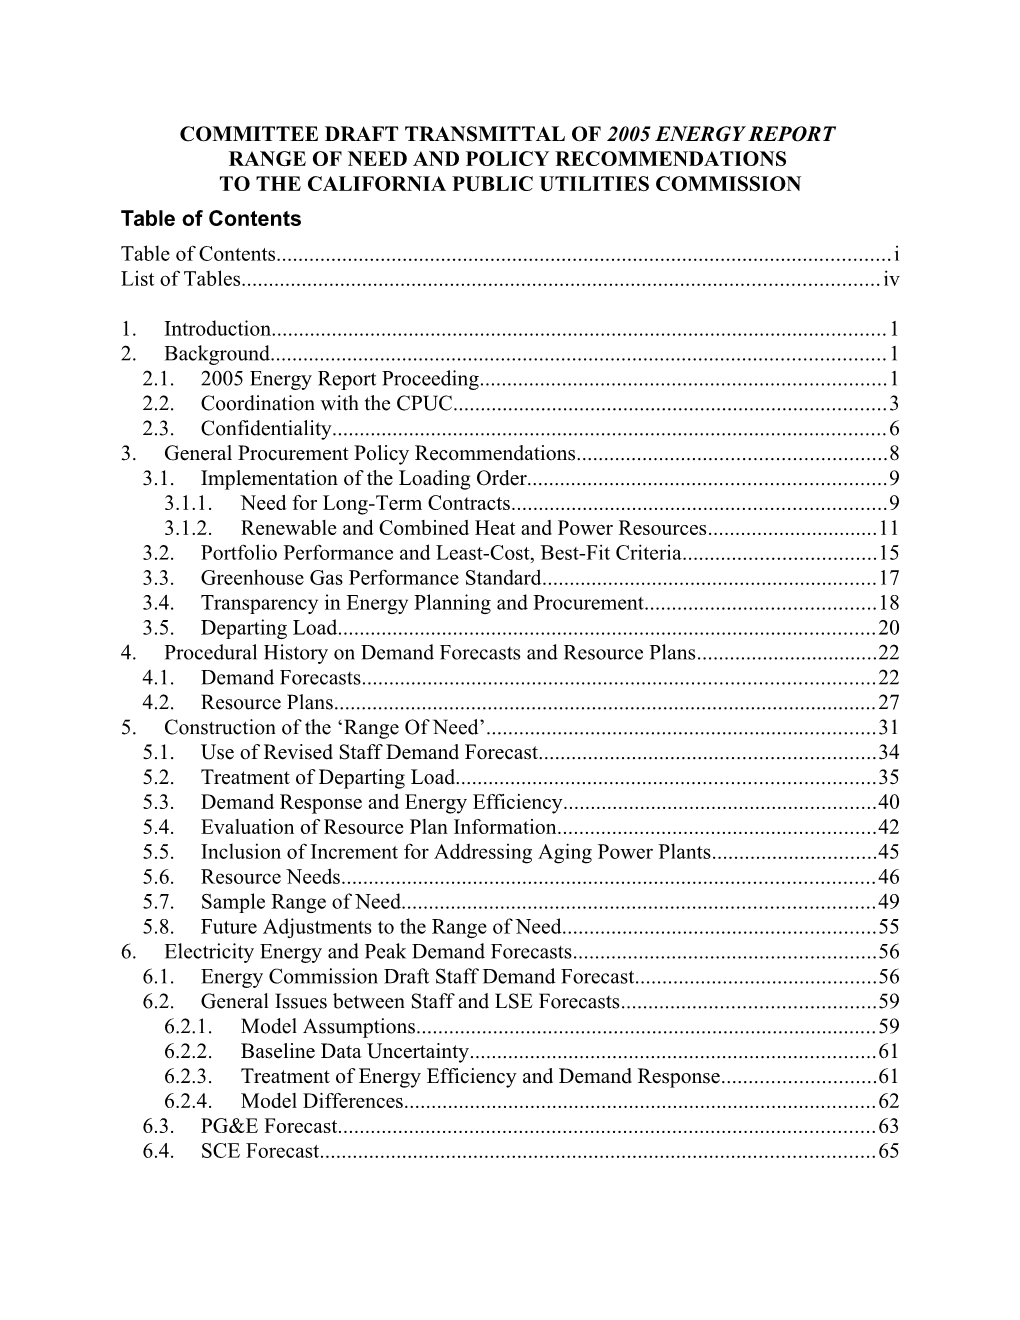 Committee Draft Transmittal of 2005 Energy Report Range of Need and Policy Recommendations